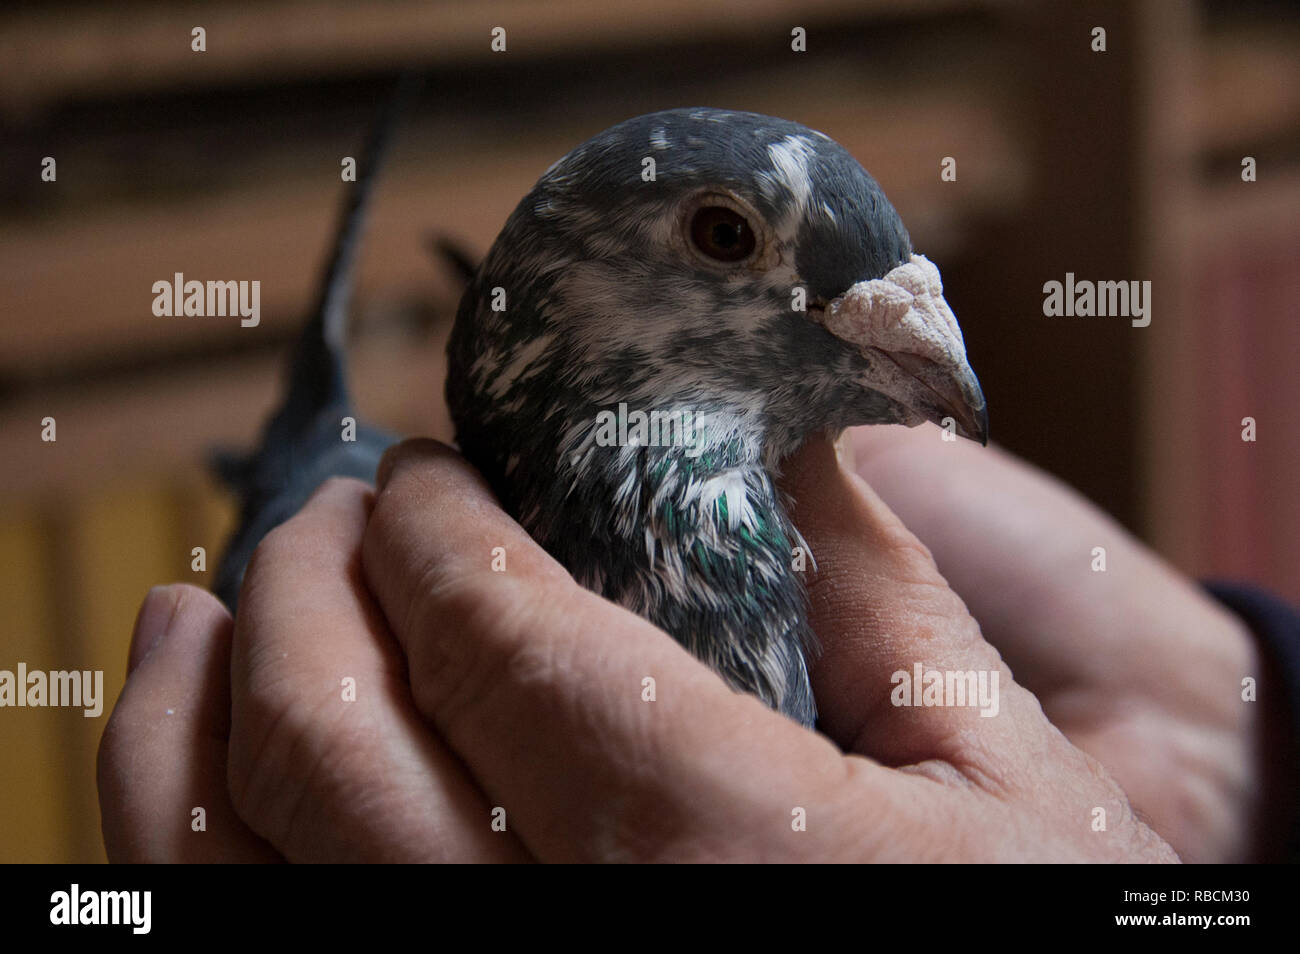 A pigeon breeder holding one of his pigeons. Stock Photo